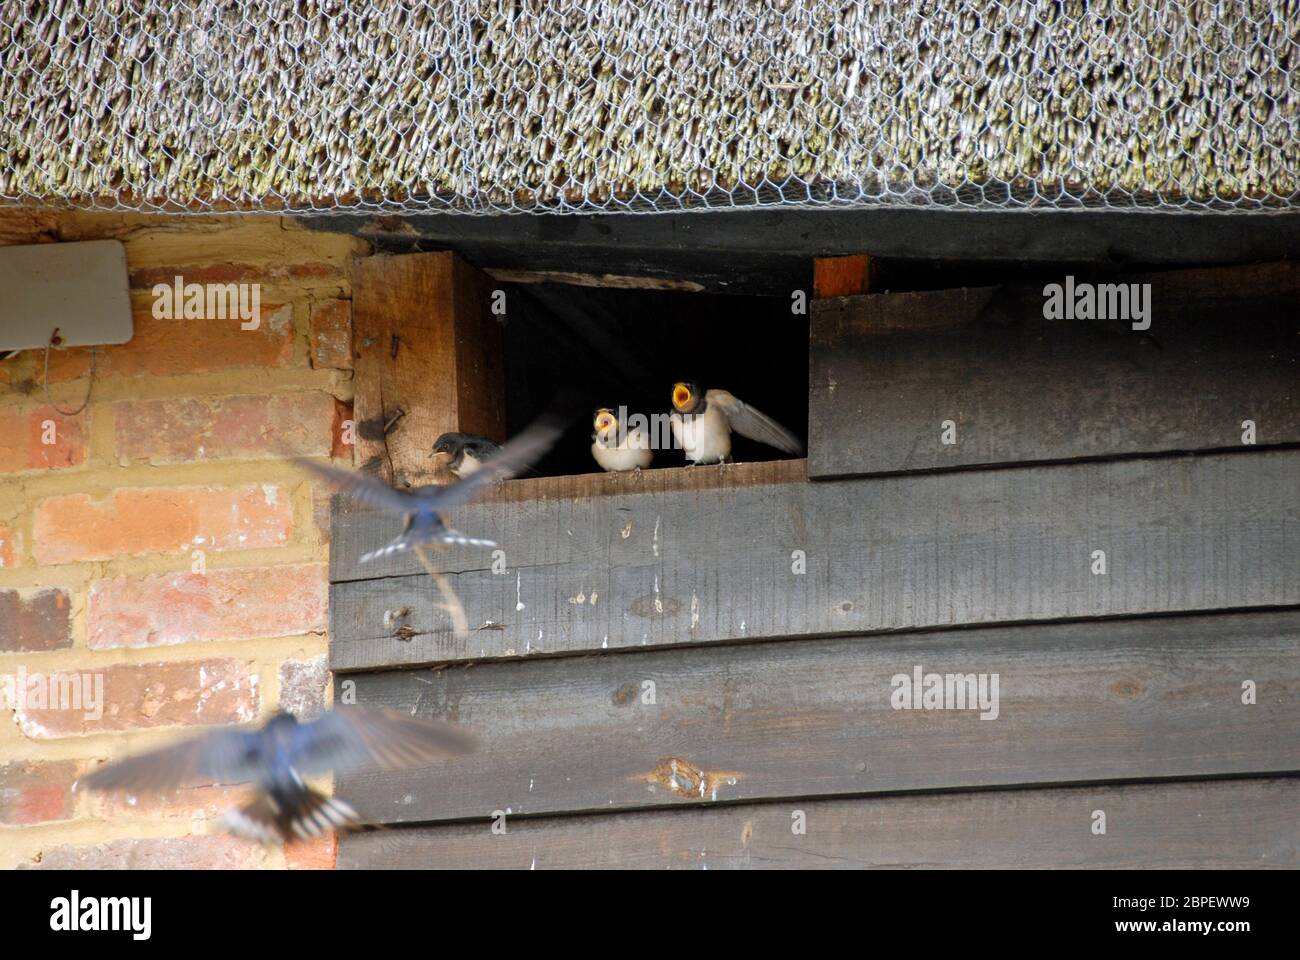 Pair of swallows bringing food to three hungry offspring waiting with open mouths in small entrance to barn Stock Photo